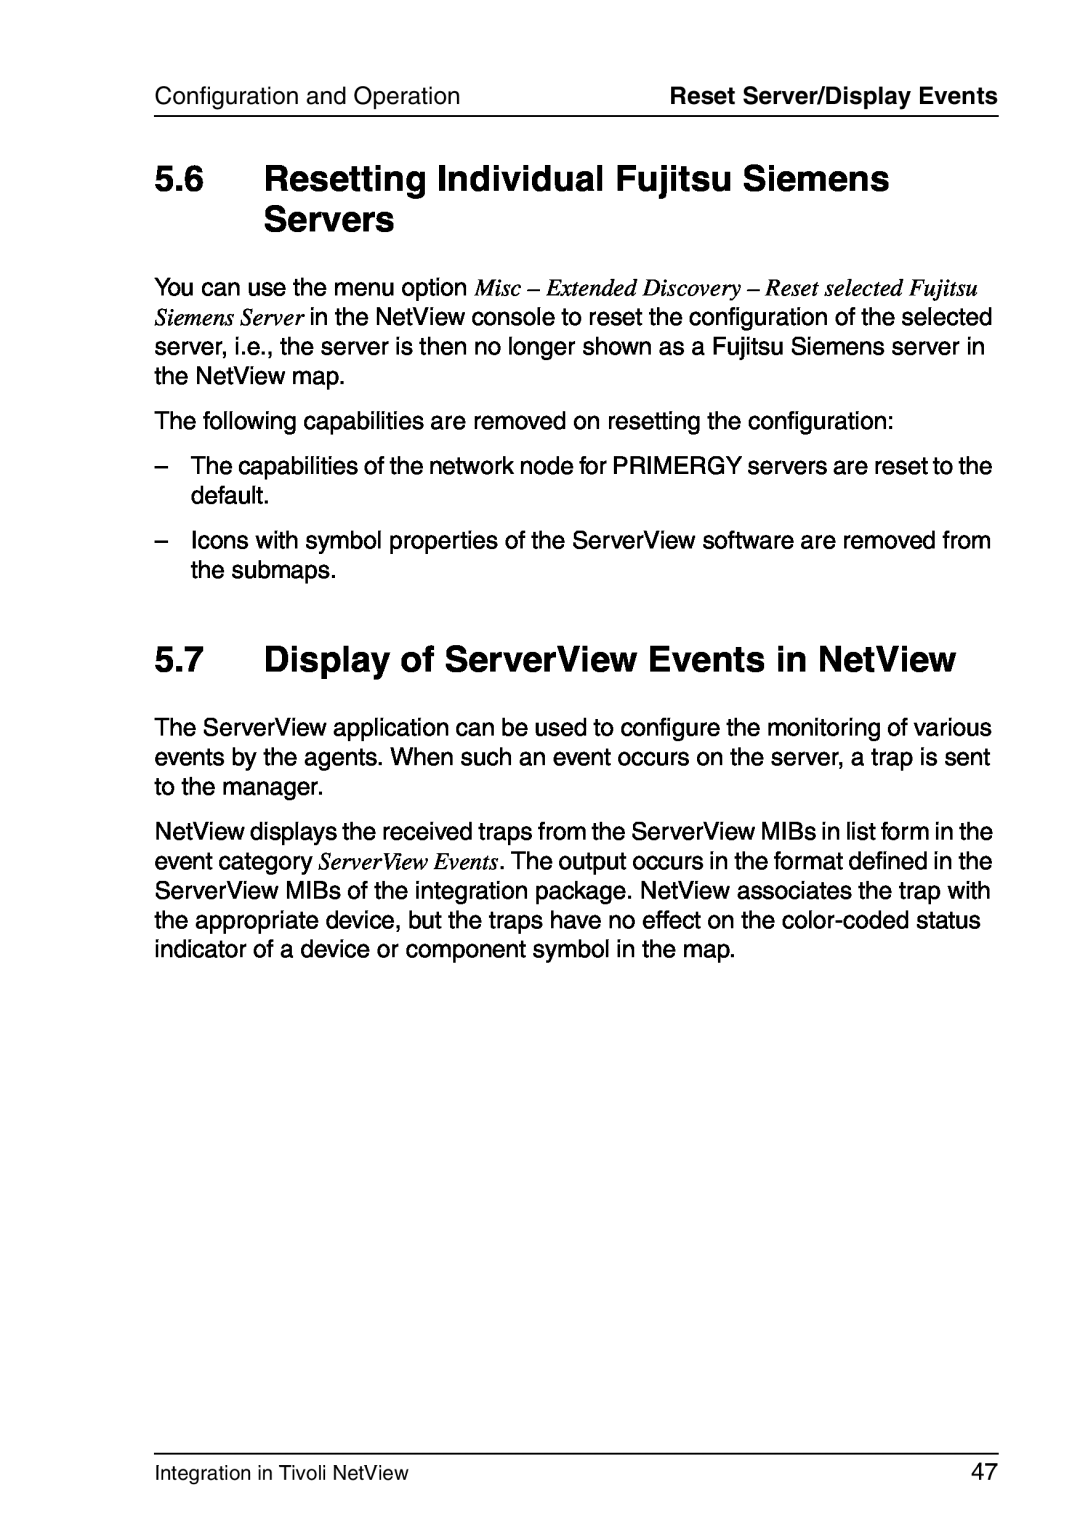 3D Connexion TivoII manual 5.6Resetting Individual Fujitsu Siemens Servers, 5.7Display of ServerView Events in NetView 